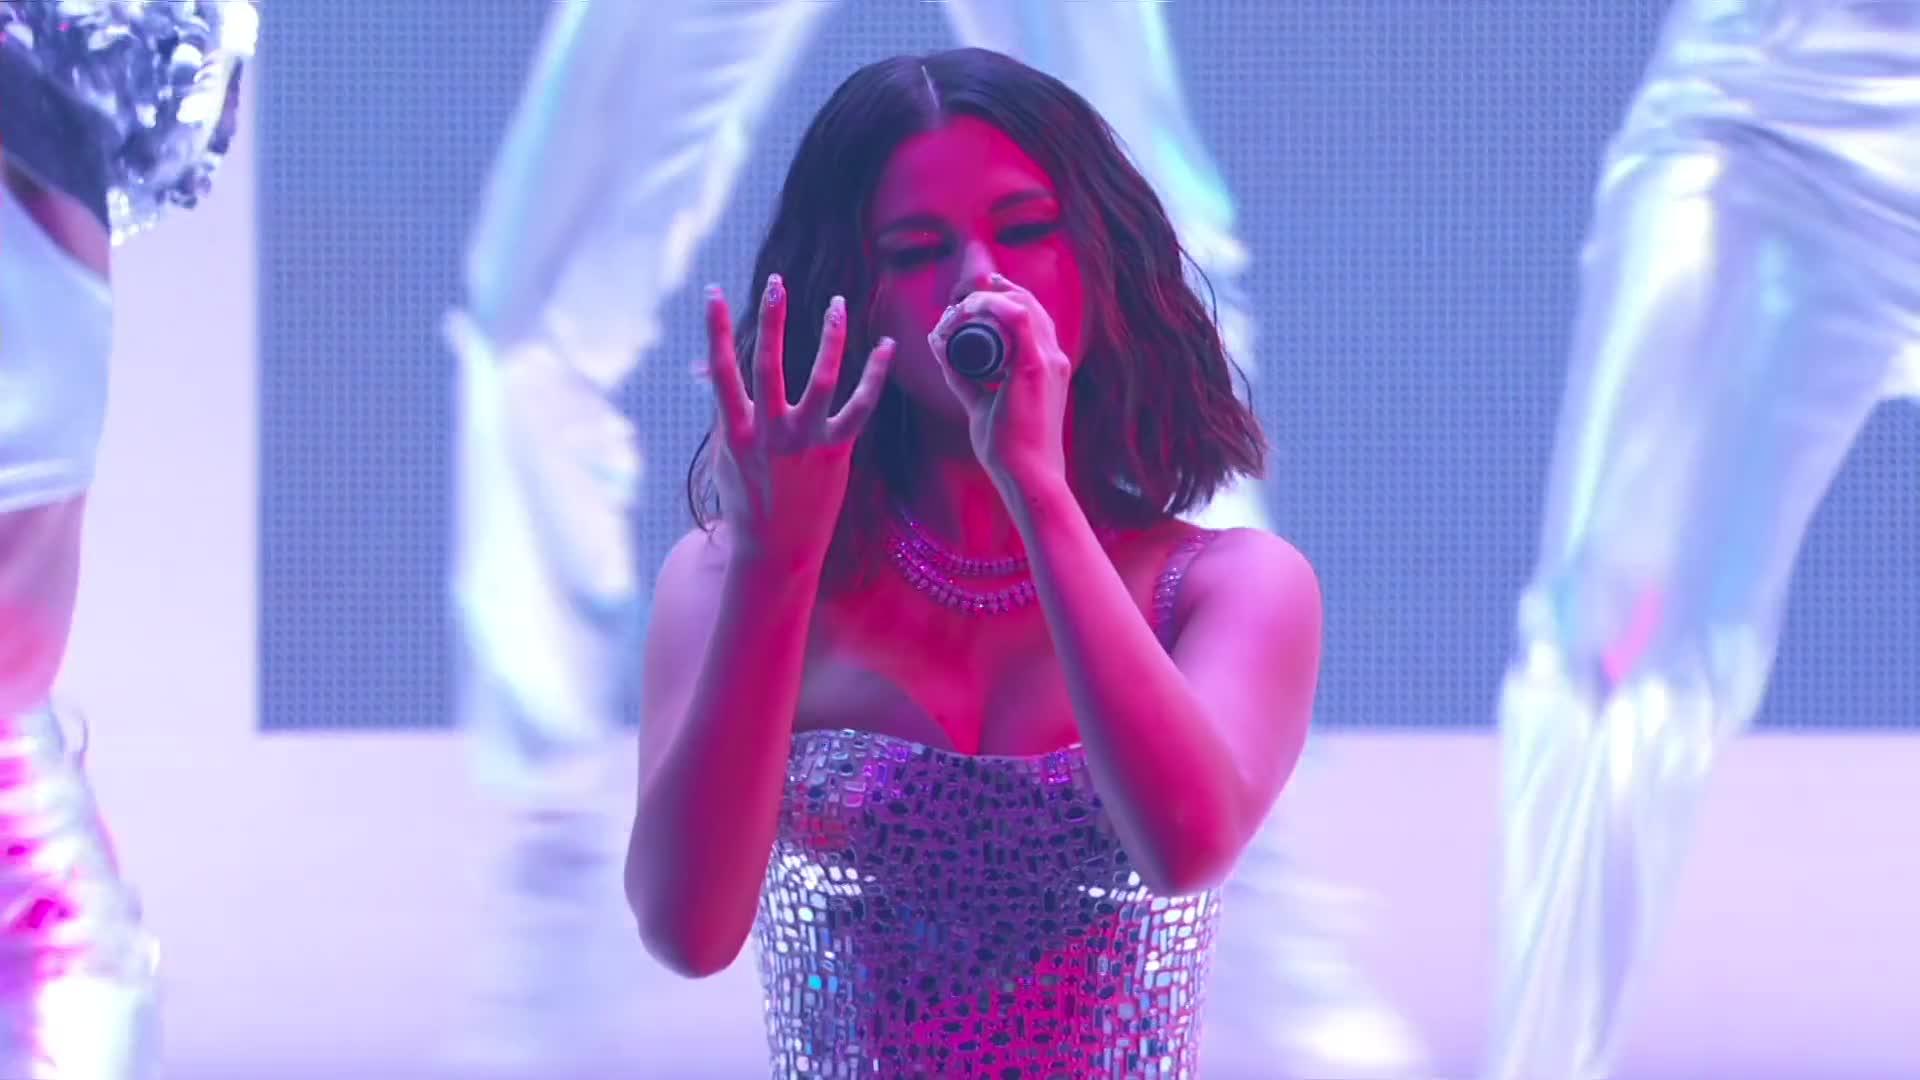 Selena Gomez - Lose You To Love Me & Look At Her Now (2019 AMAs)